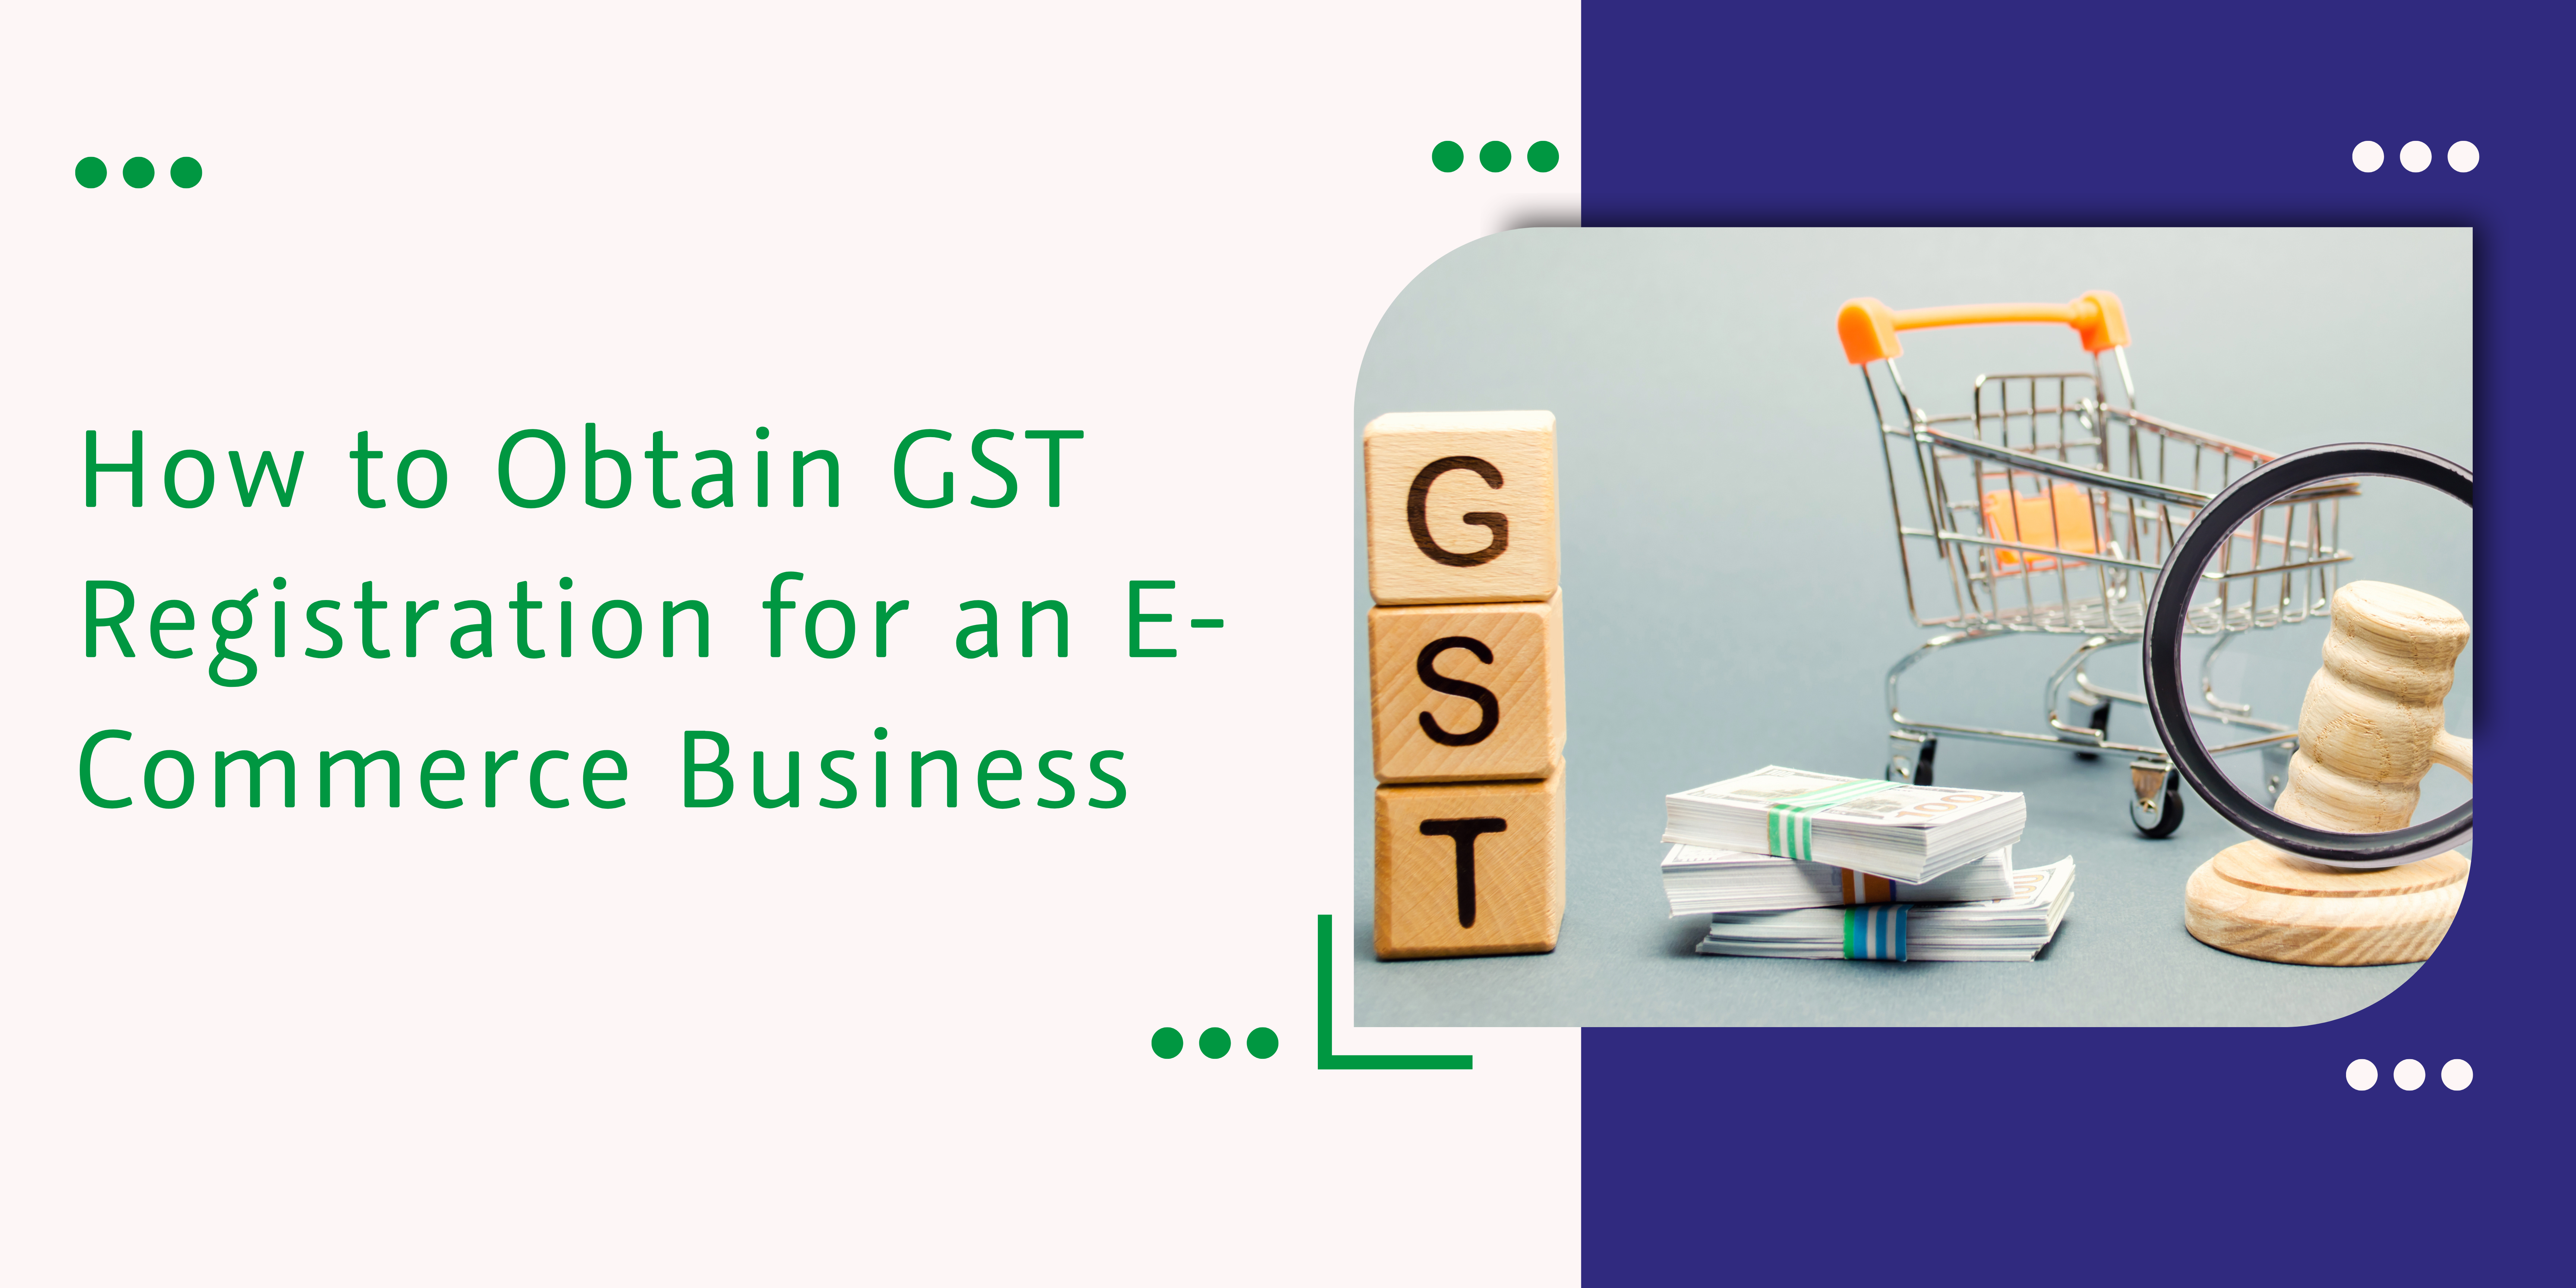 how to obtain gst registration for an e-commerce business